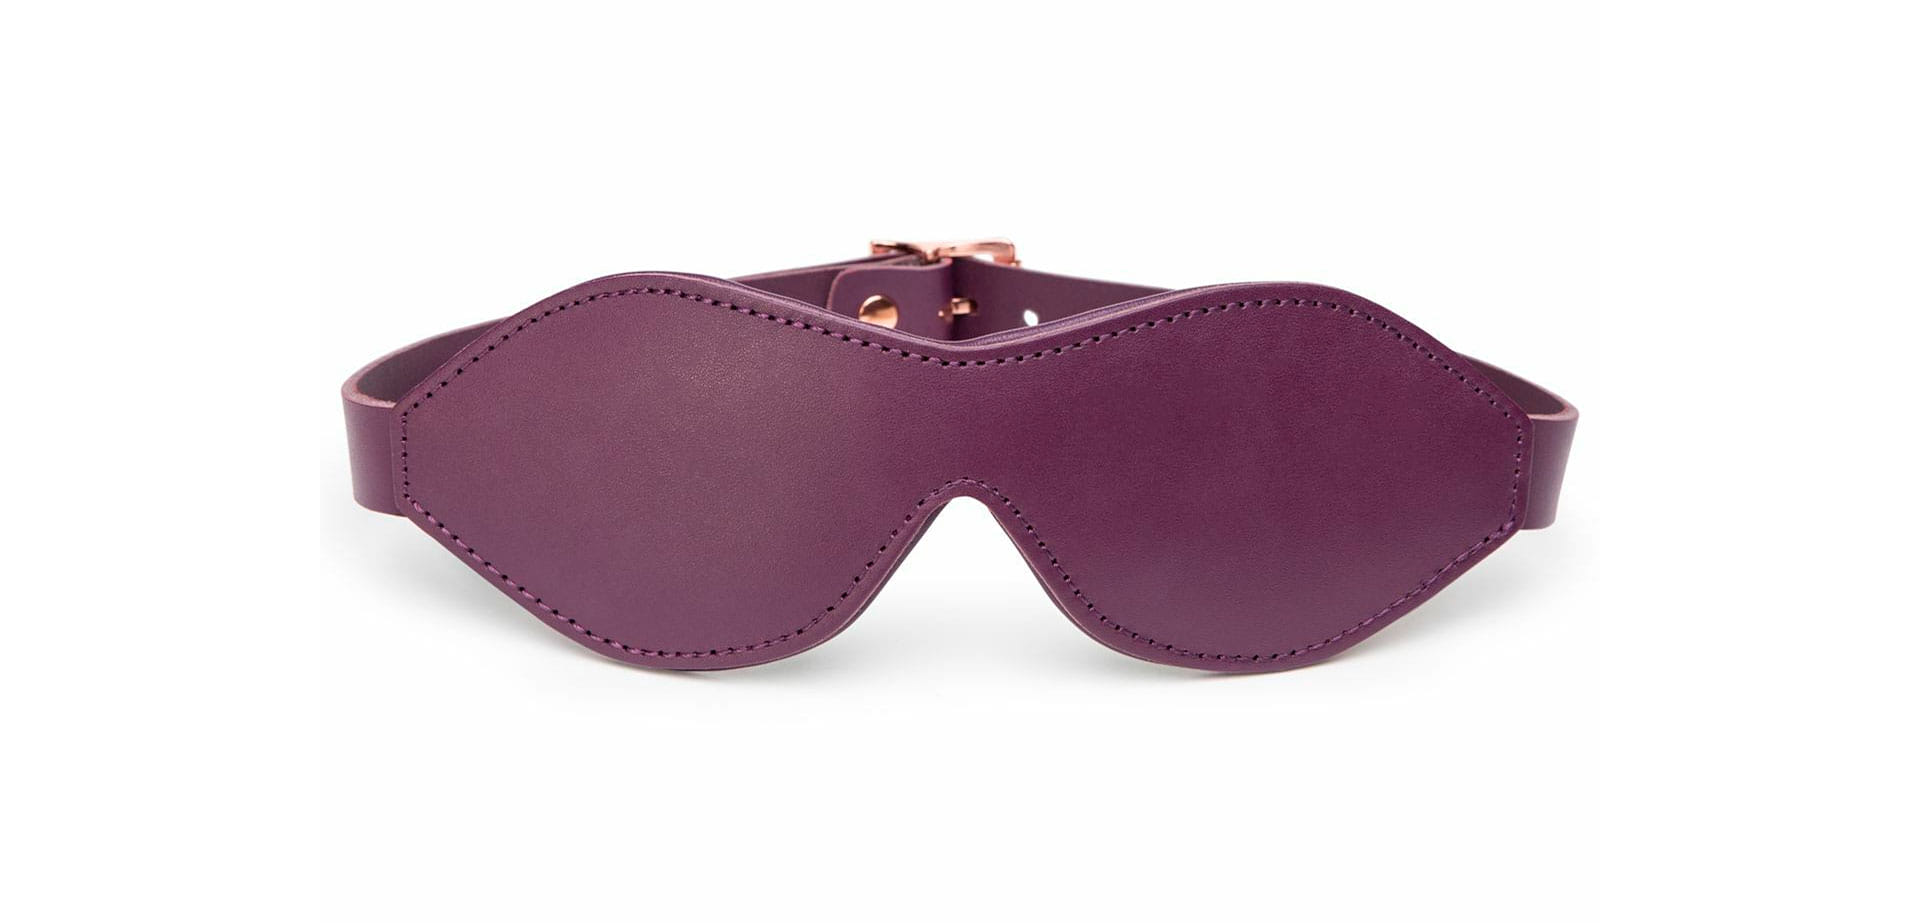 Fifty Shades Freed Leather Blindfold.